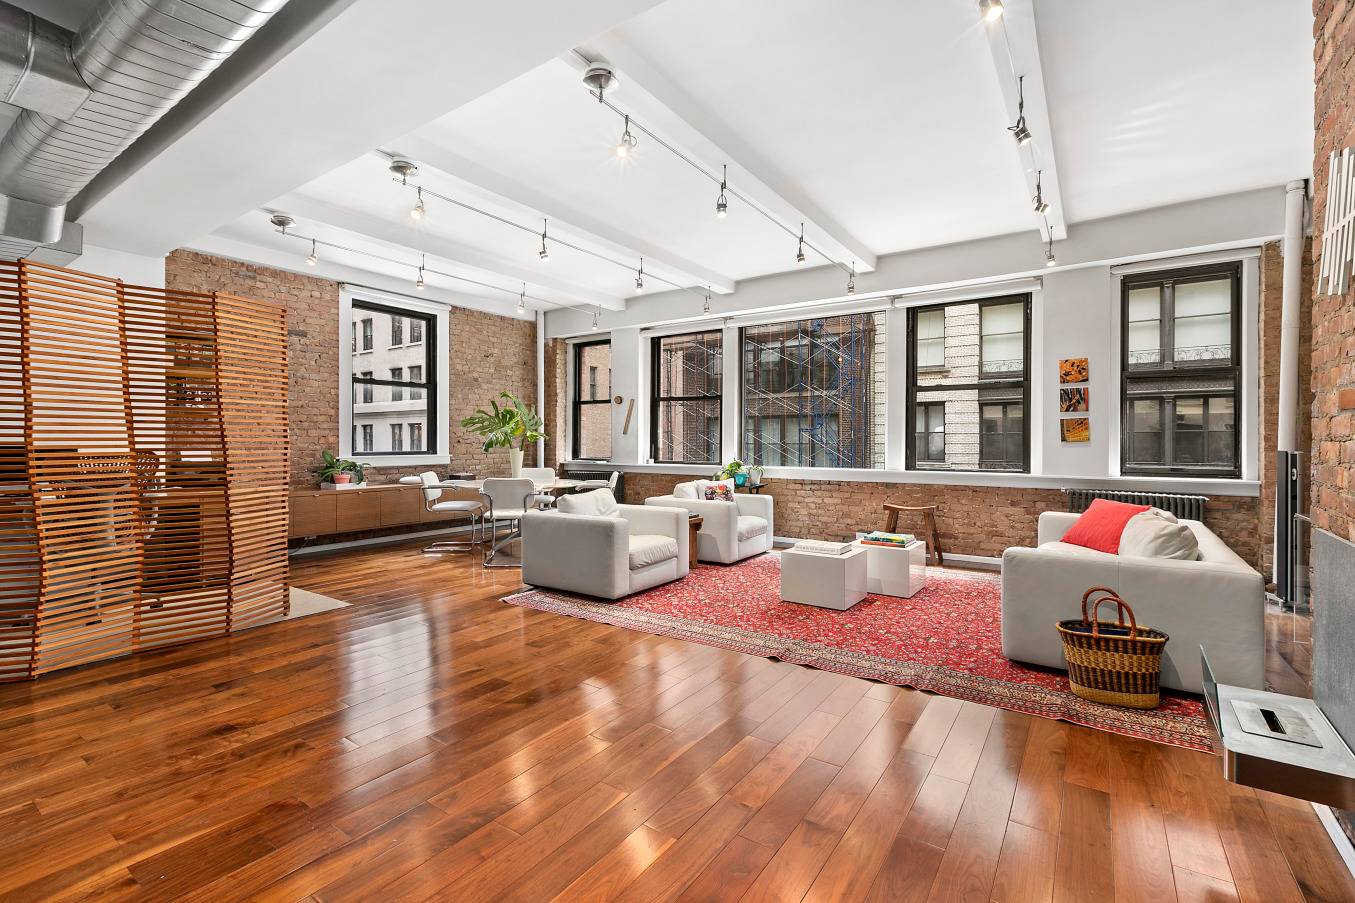 As the elevator opens, find yourself in this bright, spacious full floor loft in the heart of Manhattan's chic Flatiron district.